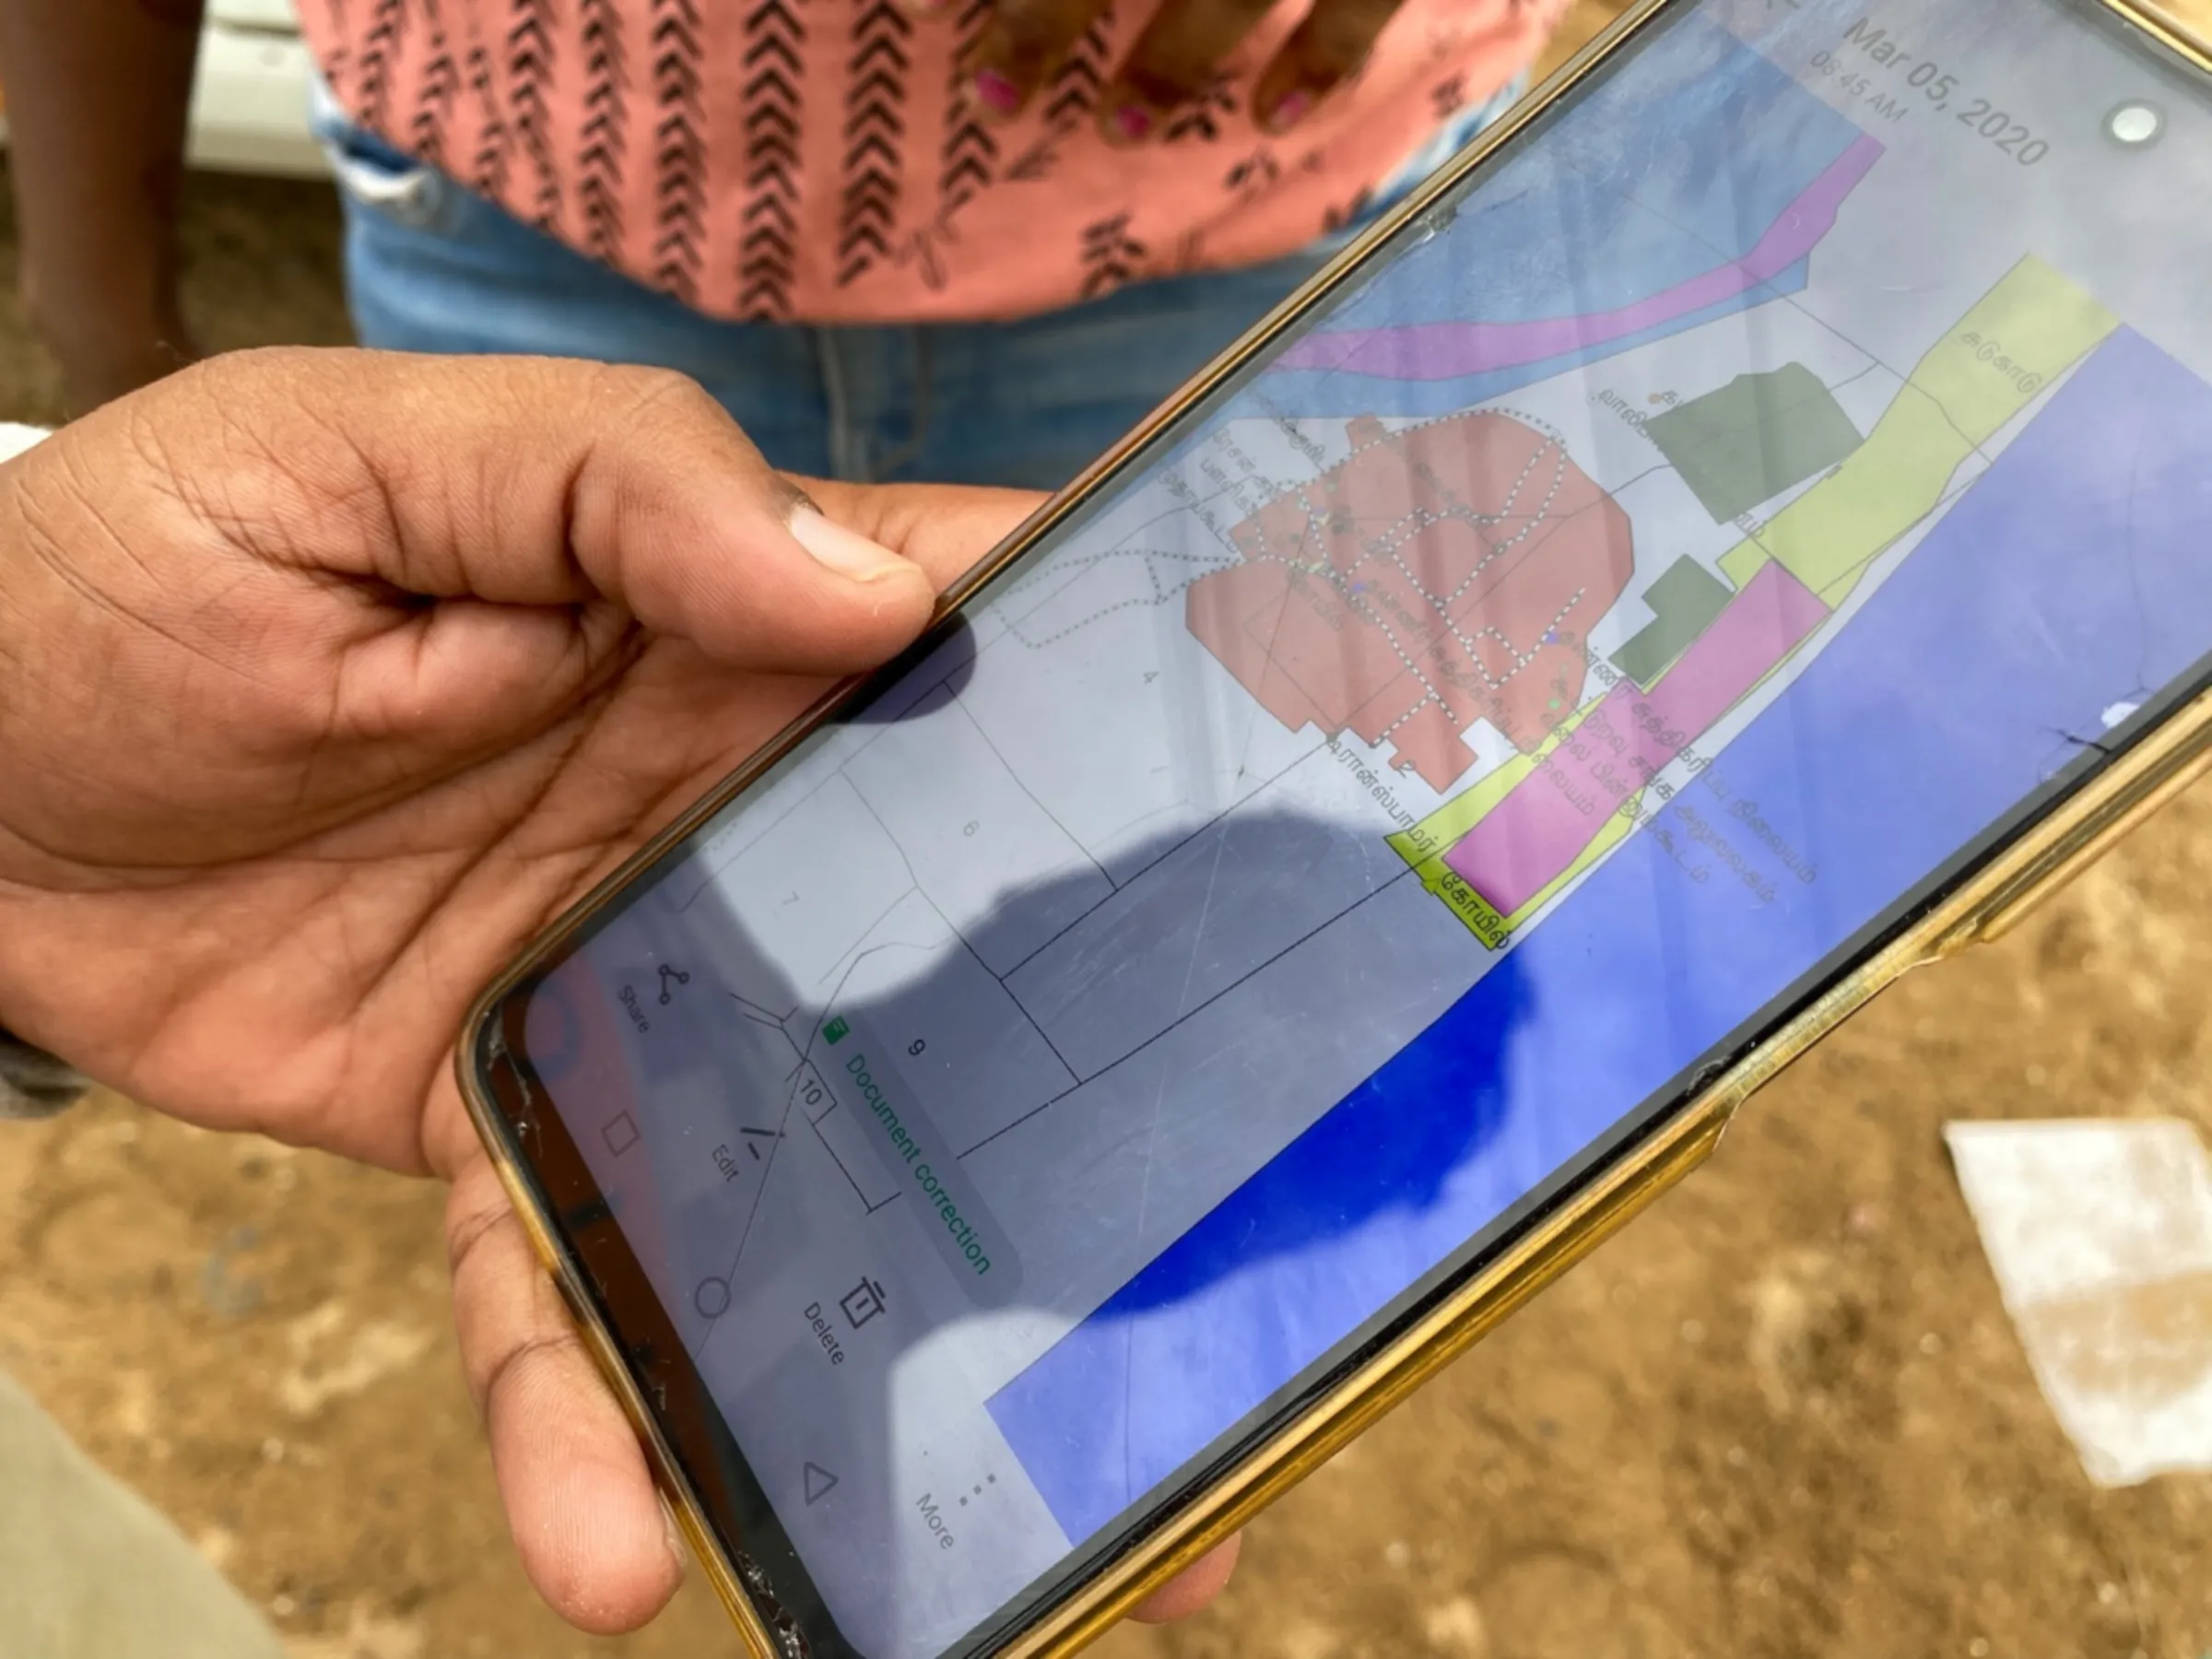 Bharath S Raji holds out his smartphone to show a map of Gunankuppam village through a fisherman’s eyes, in Gunankuppam, near Chennai, India, July 14, 2023